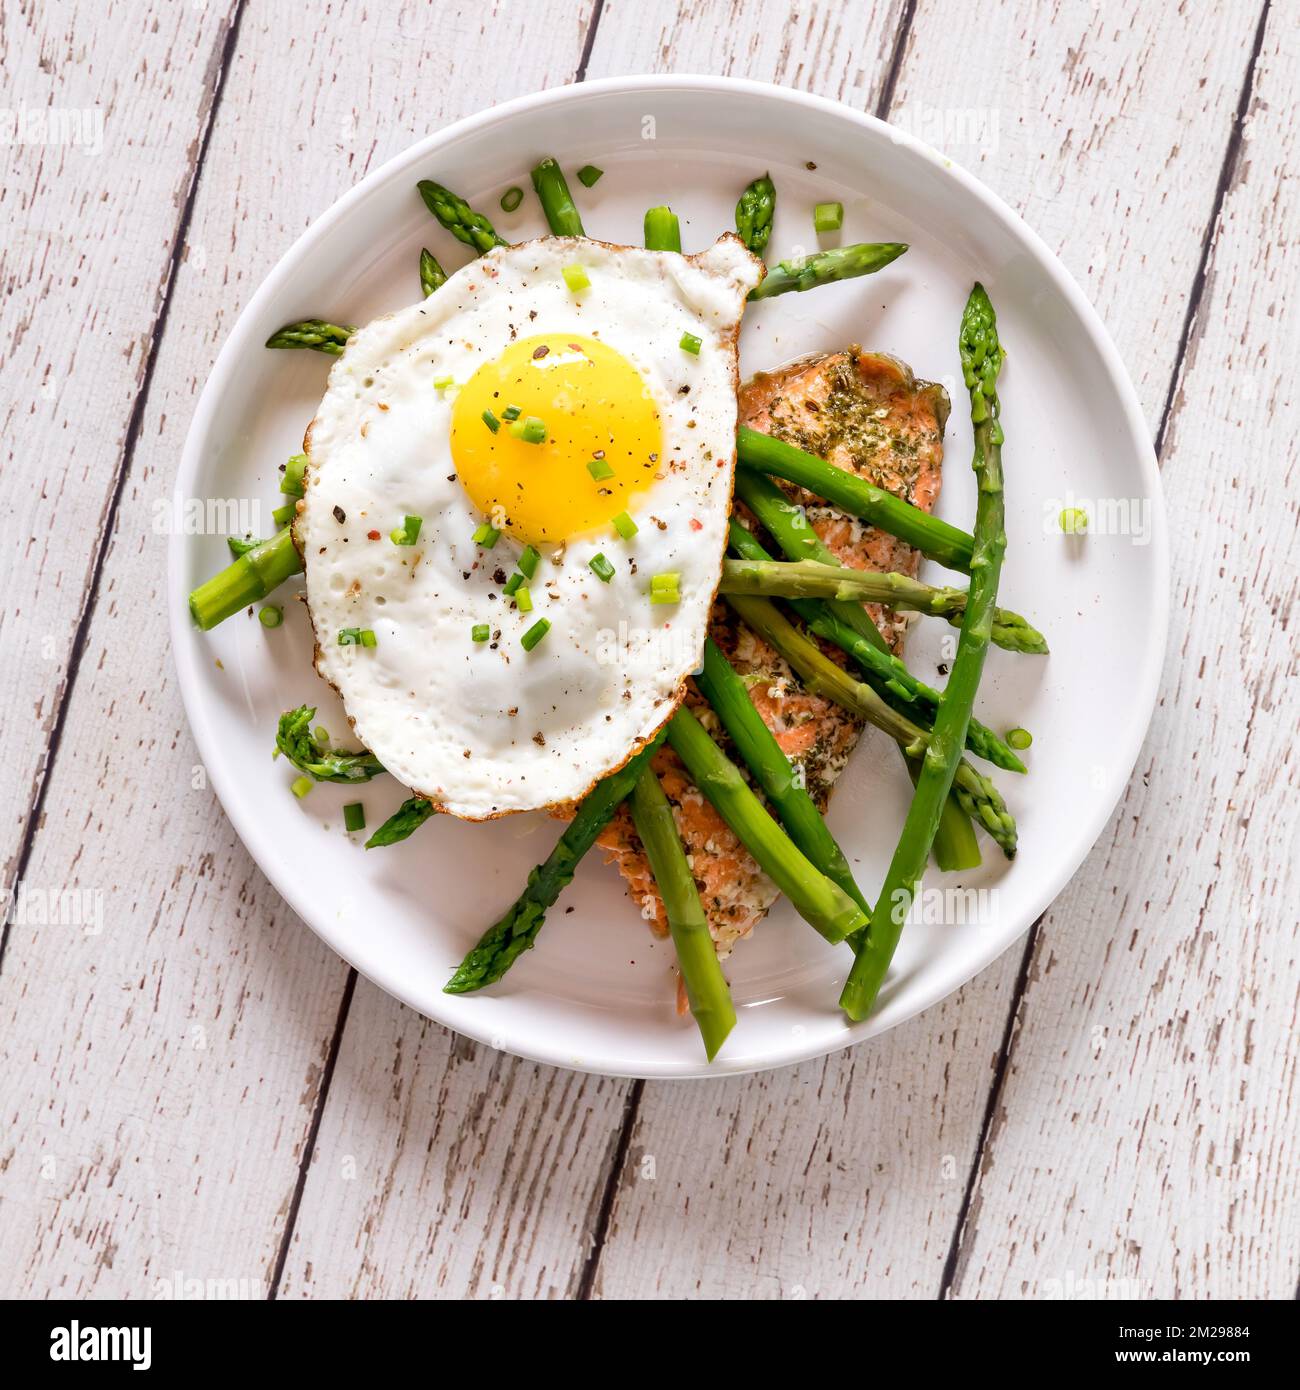 A plate of roasted salmon, sauteed asparagus and a fried egg on top. Stock Photo